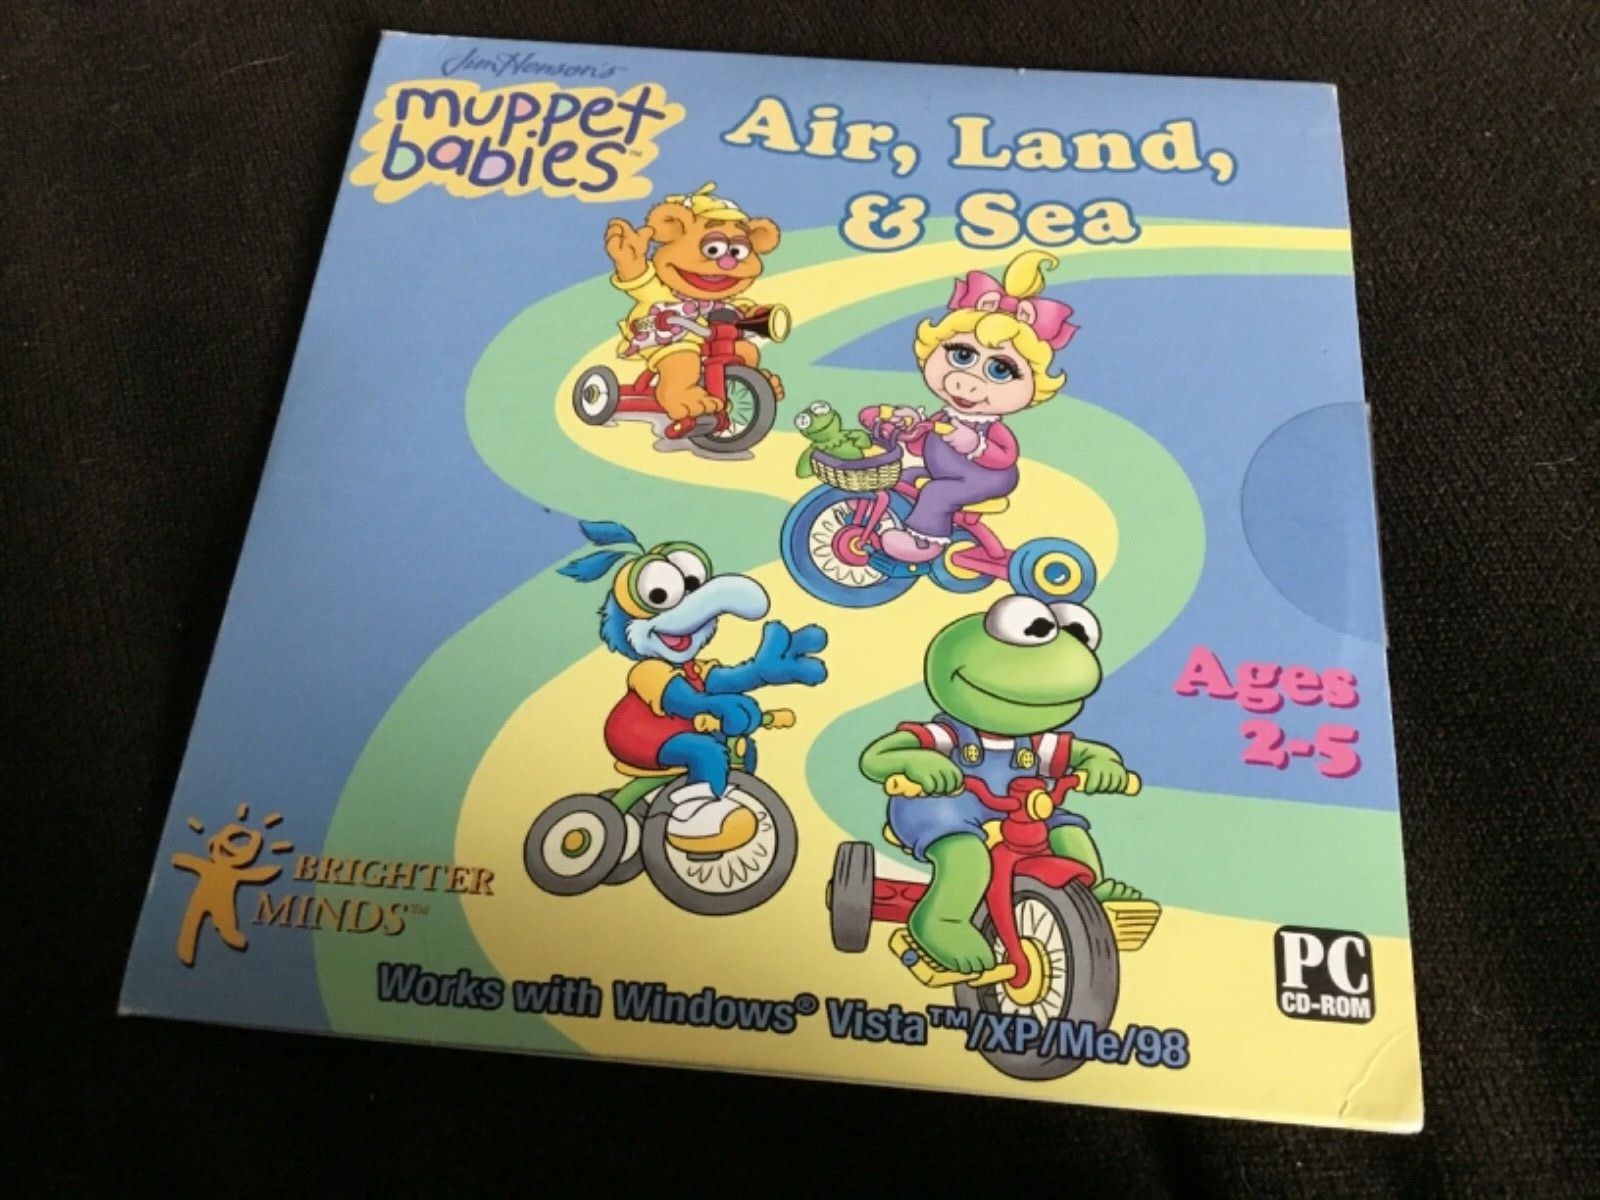 MUPPET BABIES ~AIR, LAND AND SEA~ PC CD ROM EARLY LEARNING GAME